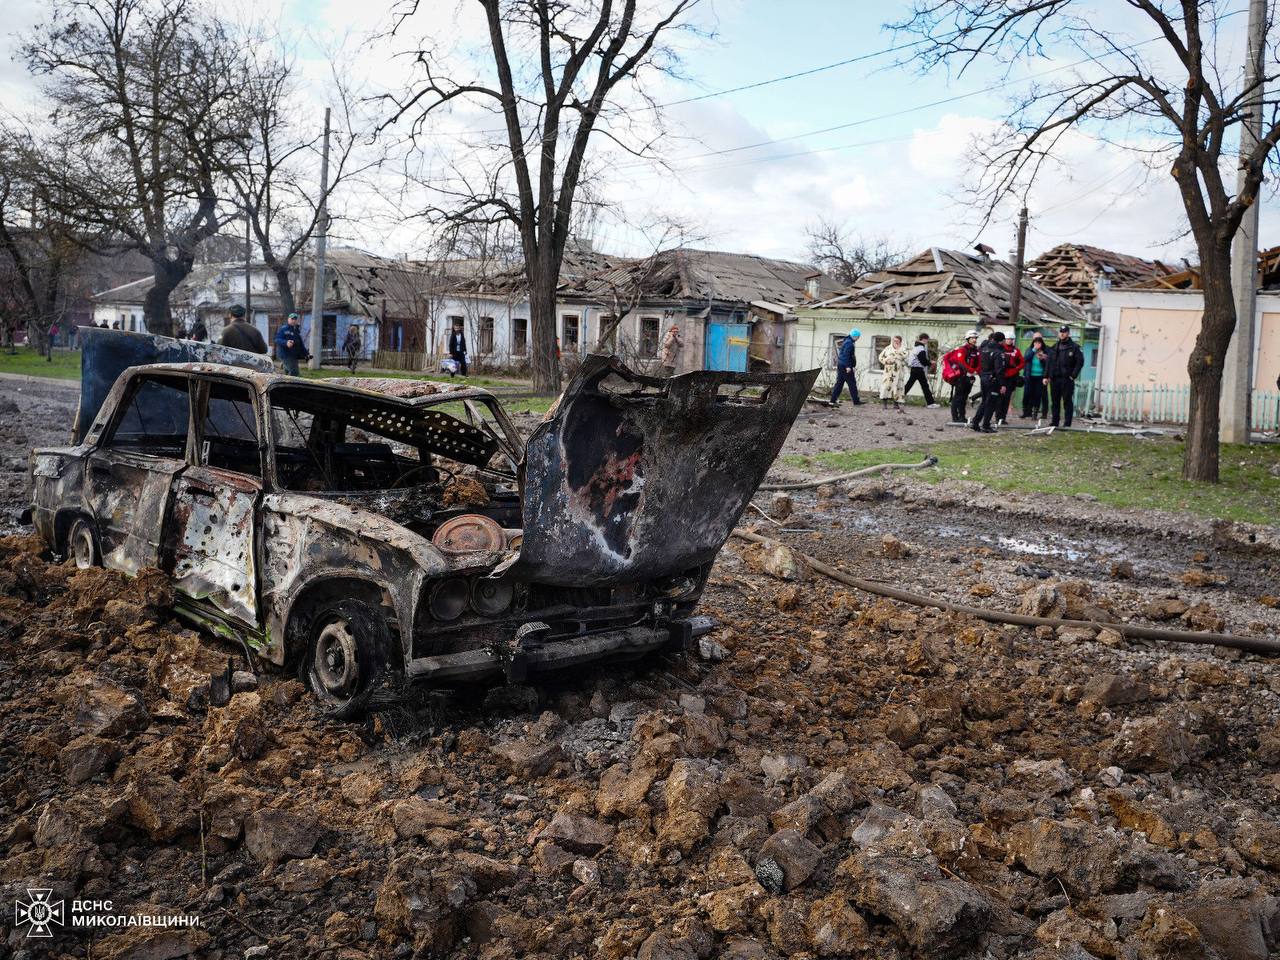 Update: Russian March 17 attack on Mykolaiv kills 1, injures 9, including 2 children